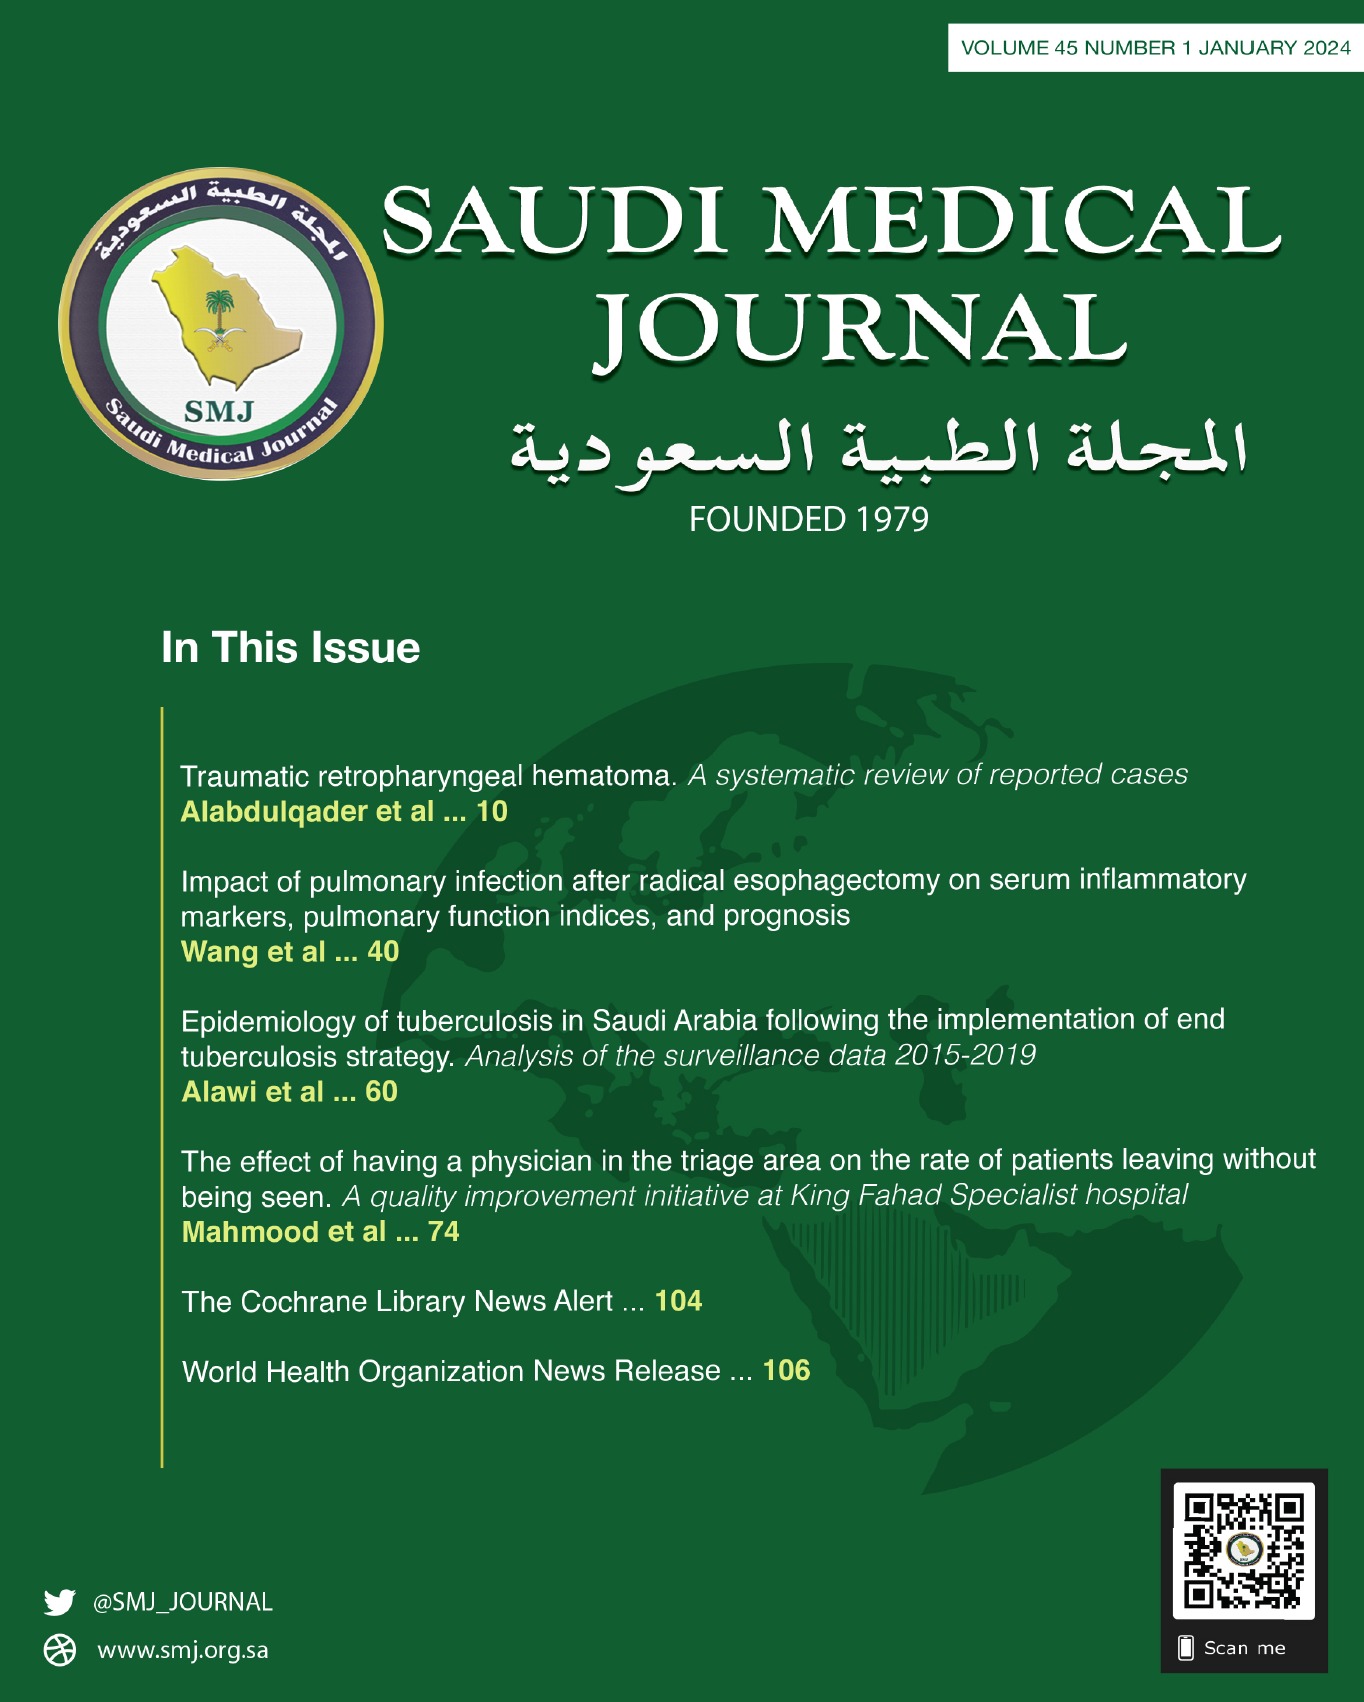 Cross-cultural modification of the University of Pennsylvania smell identification test for the Saudi Arabian population: Validation and normative values